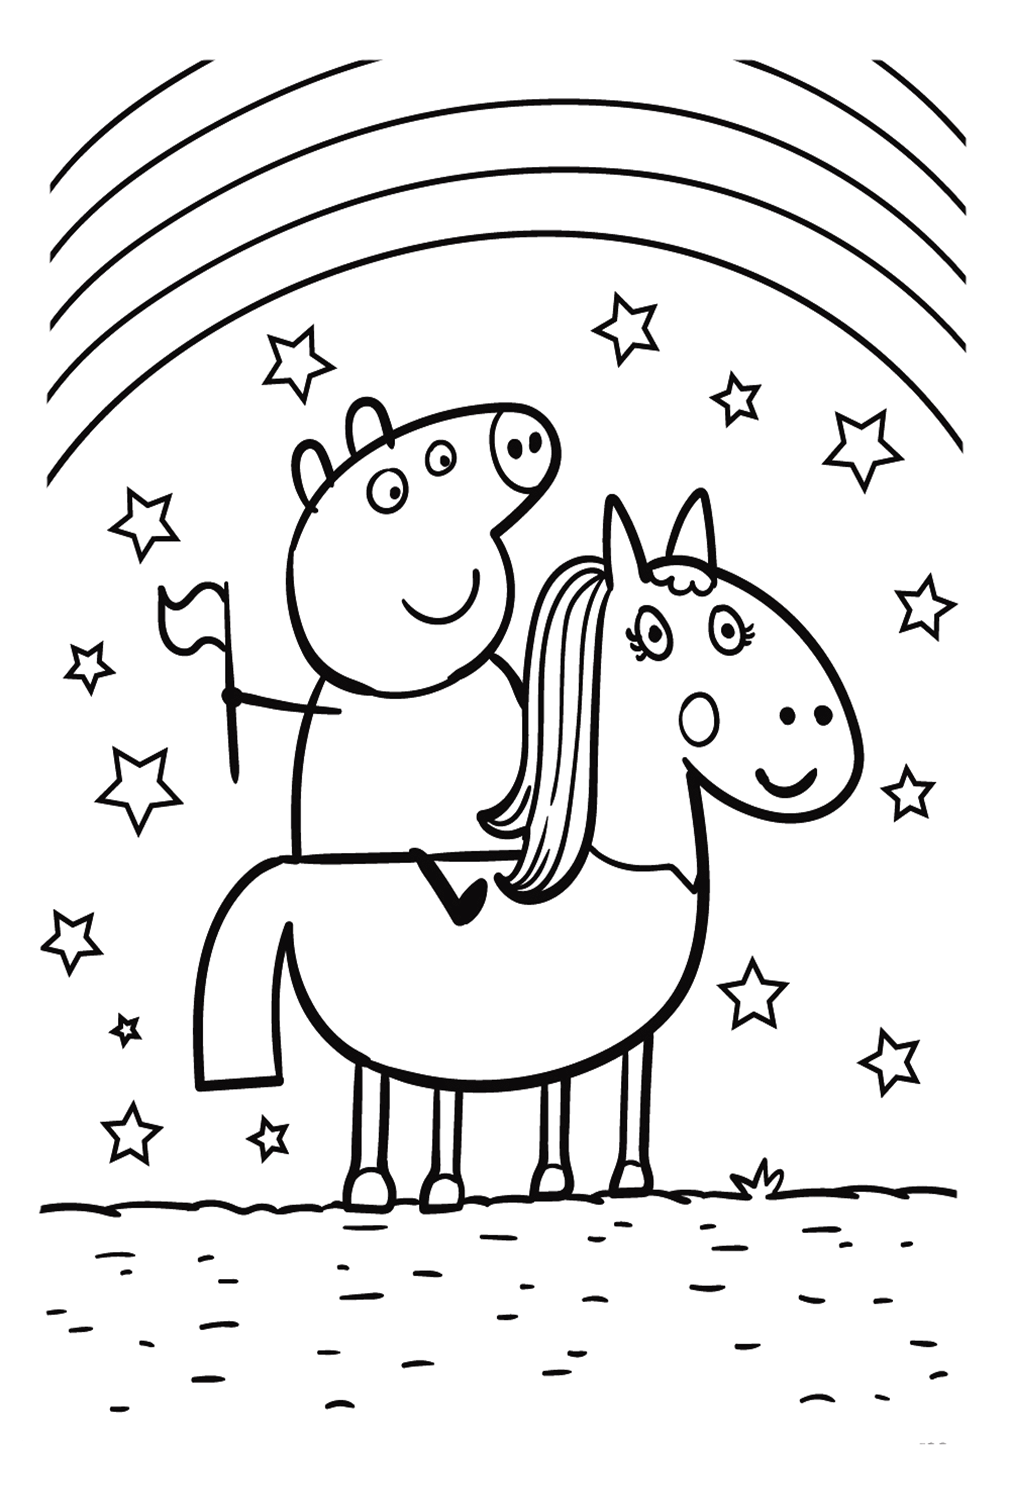 Pepa Pig With Unicorn Coloring Page from Unicorn